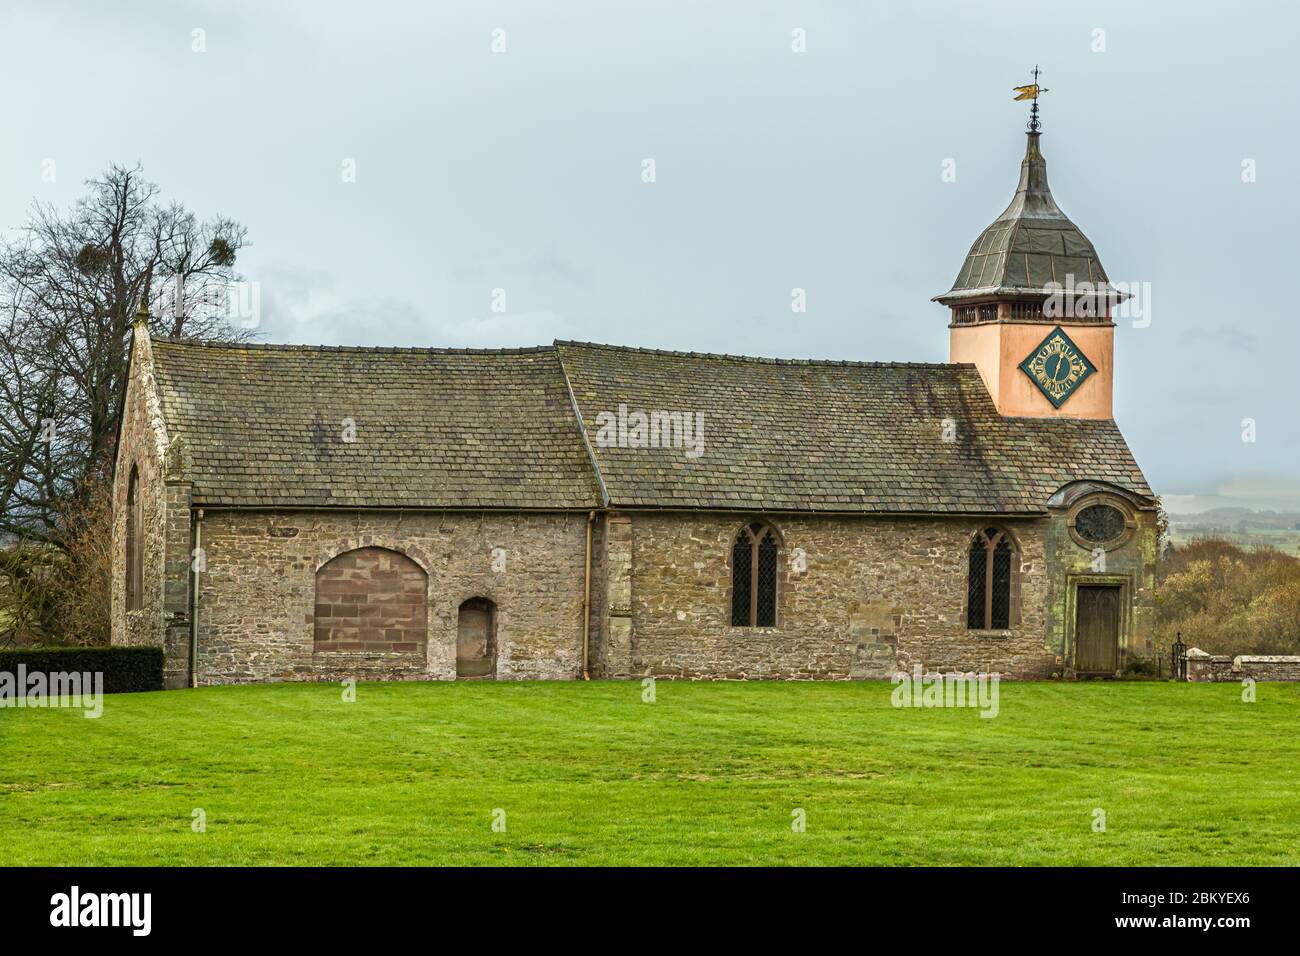 Herefordshire, Inghilterra, 3 aprile 2019: St. Michael's and All Angels Church, Croft Castle. Foto Stock